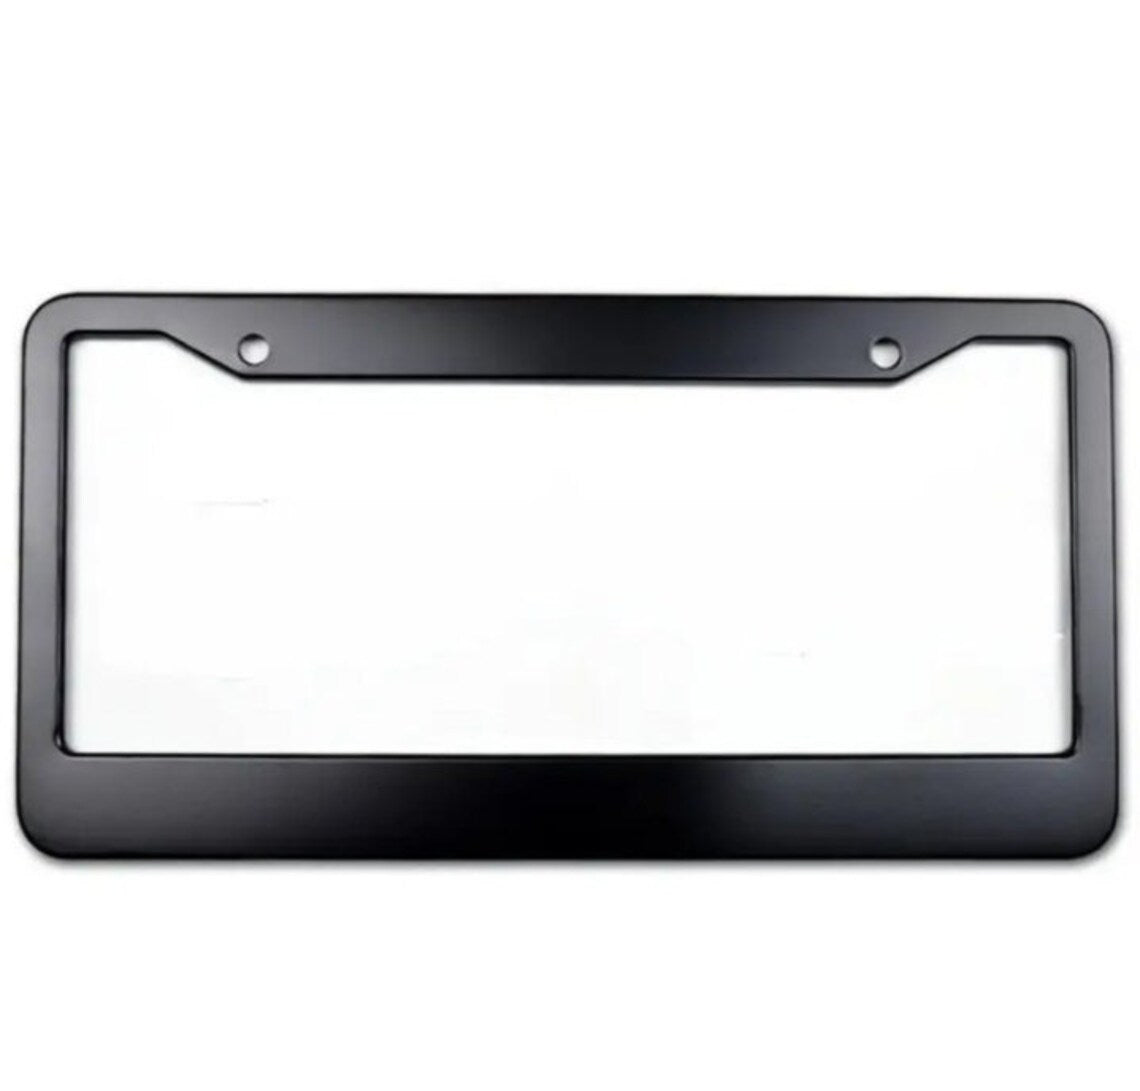 Daddy's Princess Black Plastic or Aluminum License Plate Frame Truck Car Van Décor Car Accessories Car Gifts Holder Funny Auto Parts